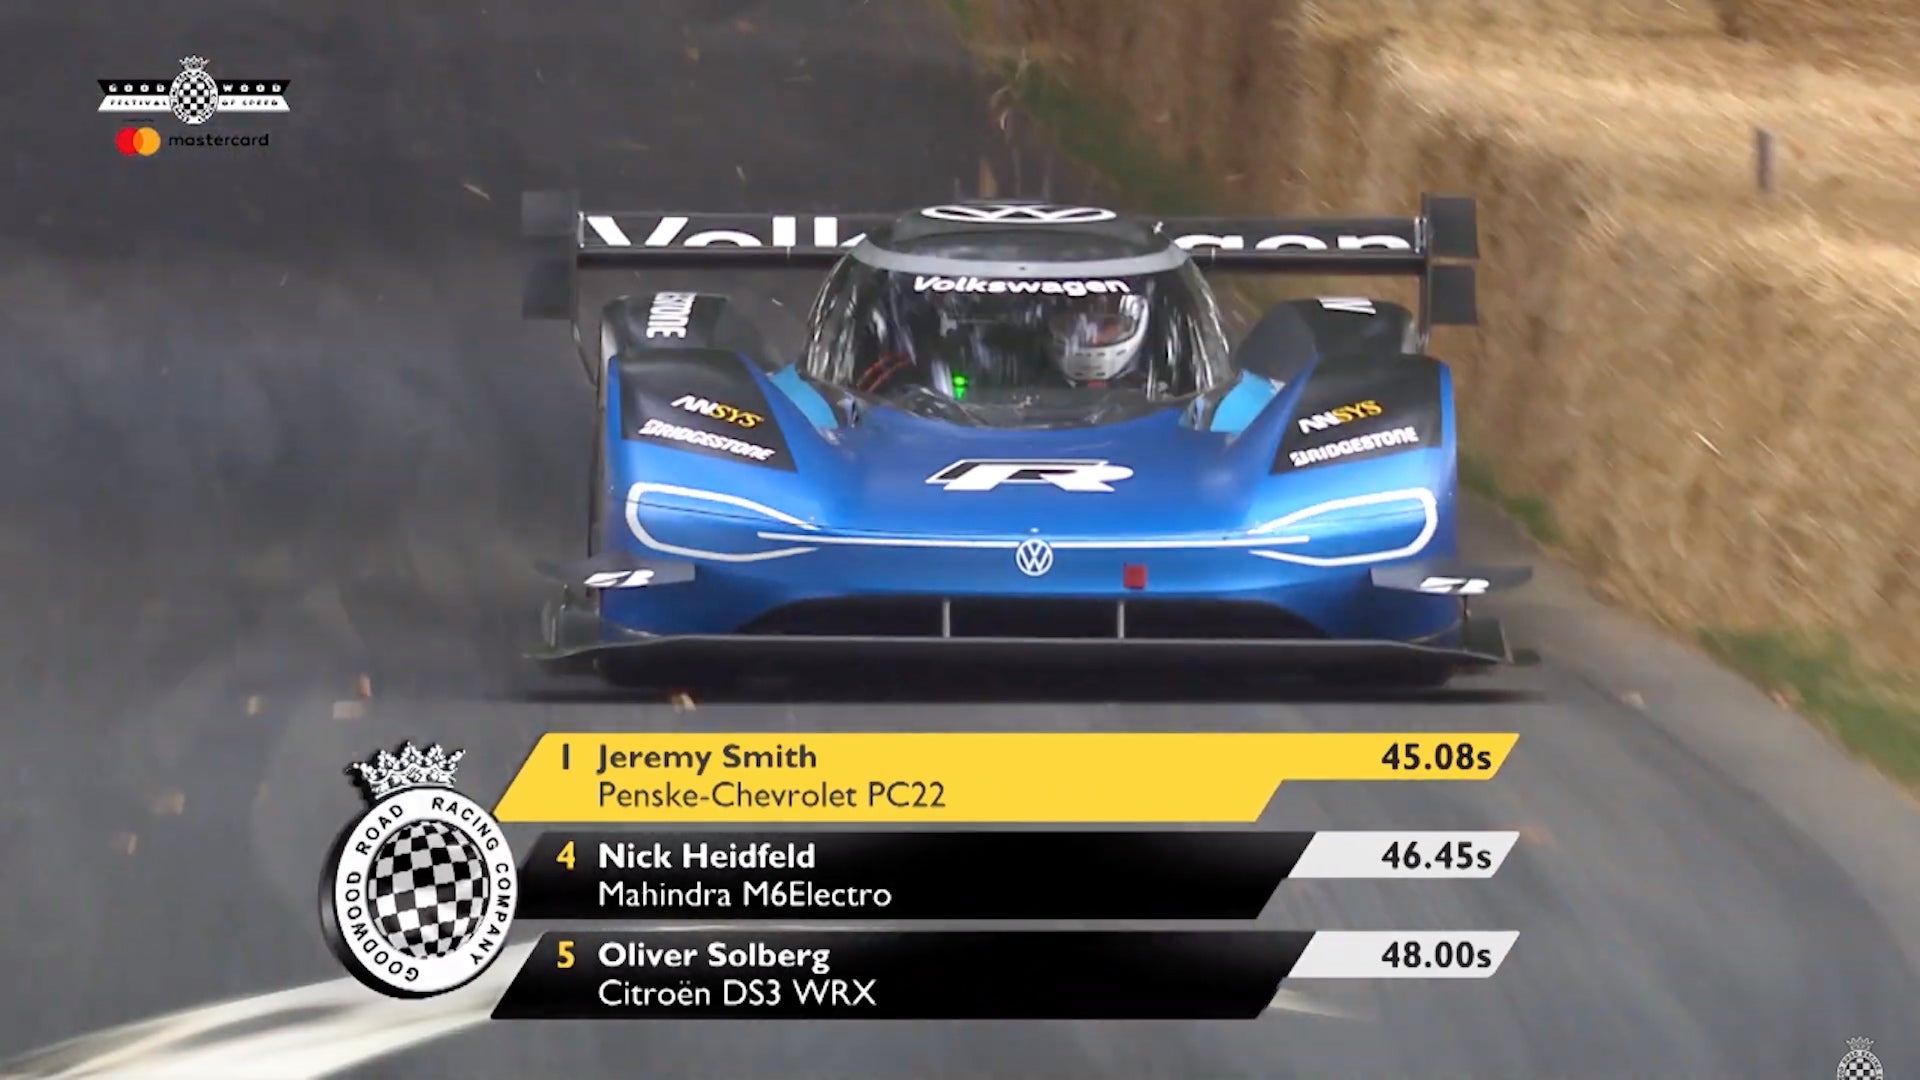 Watch: Volkswagen Pulverizes Goodwood Hill Climb Record With Electric ID.R Prototype